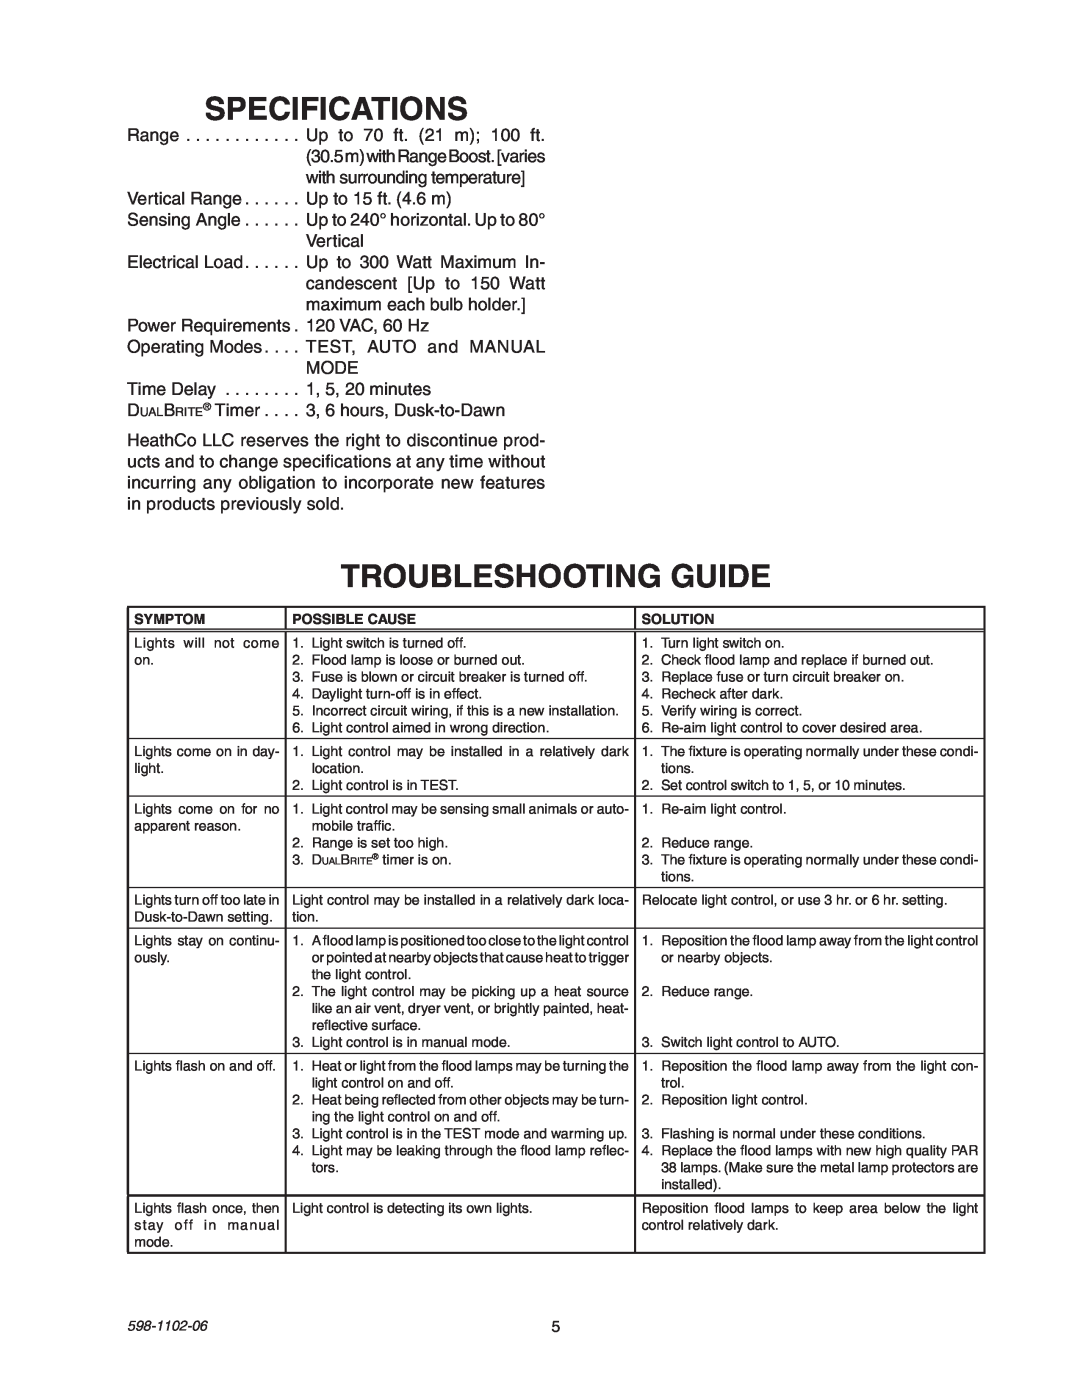 Heath Zenith 5105 manual Specifications, Troubleshooting Guide 